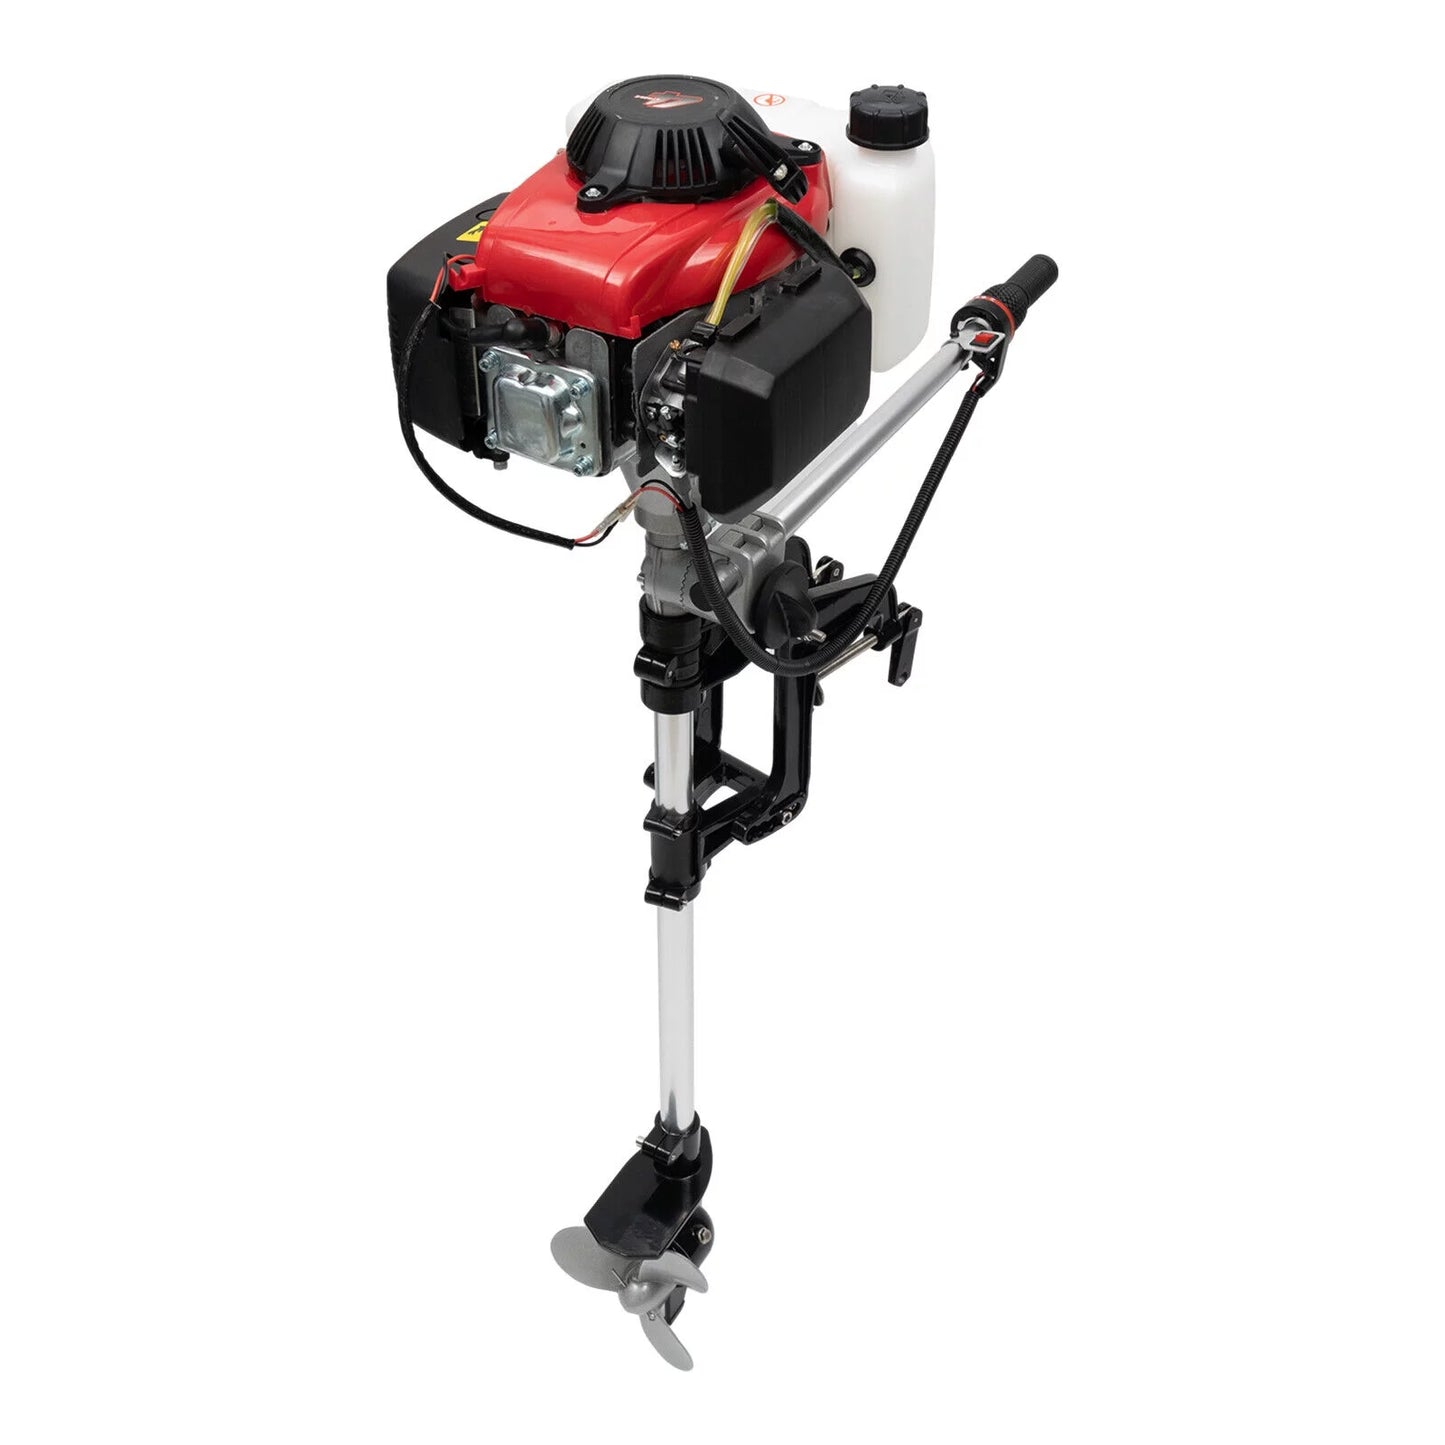 1.6KW Boat Engine Heavy Duty Outboard Motor with Air Cooling System 53.2CC